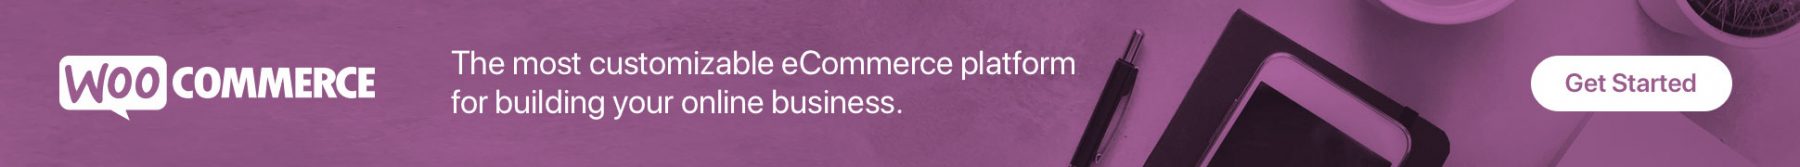 What exactly does WooCommerce do?